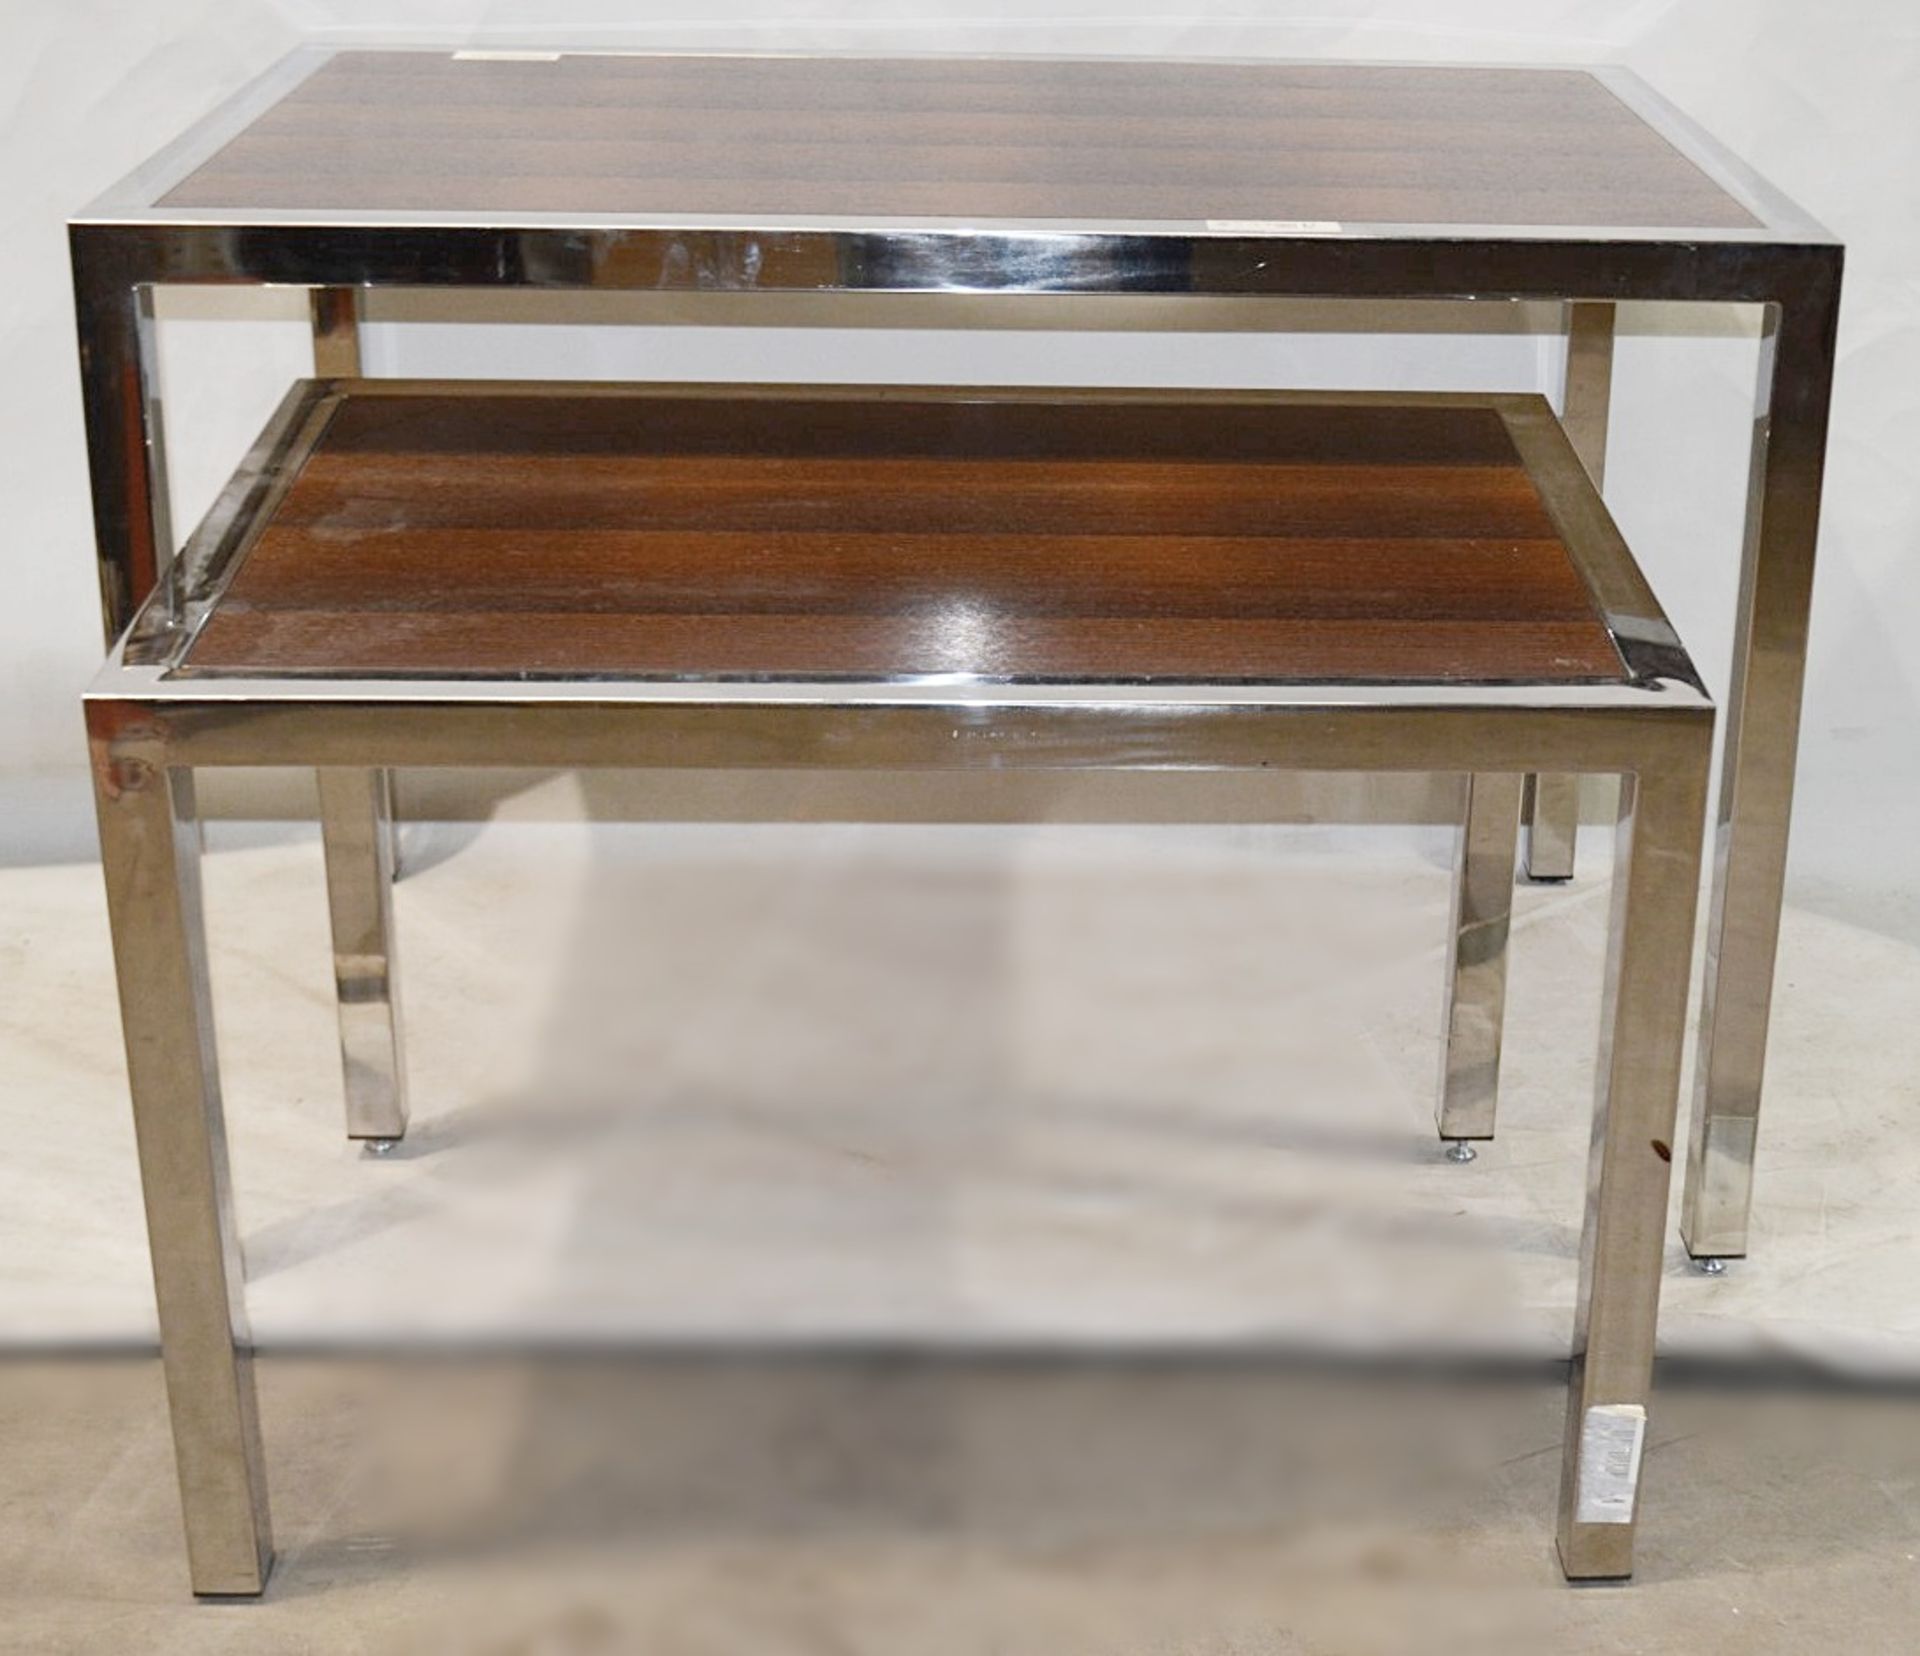 A Pair Of Rectangular Nesting Retail Shop Display Tables - Max Dimensions: H92 x W135 x D90cm - Ex- - Image 4 of 8